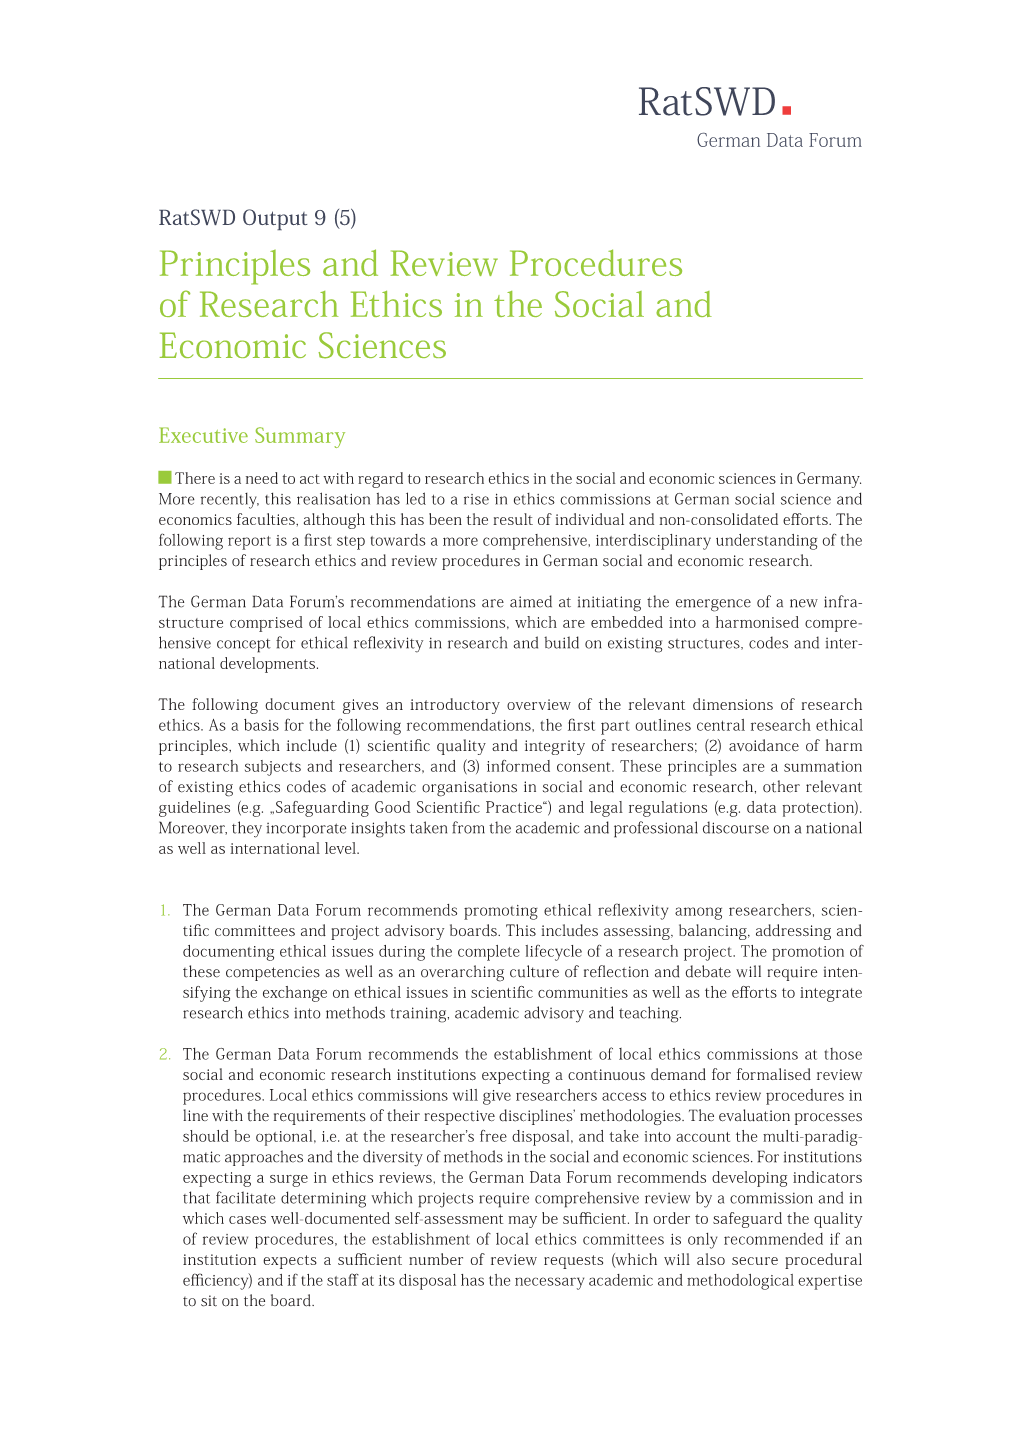 Principles and Review Procedures of Research Ethics in the Social and Economic Sciences